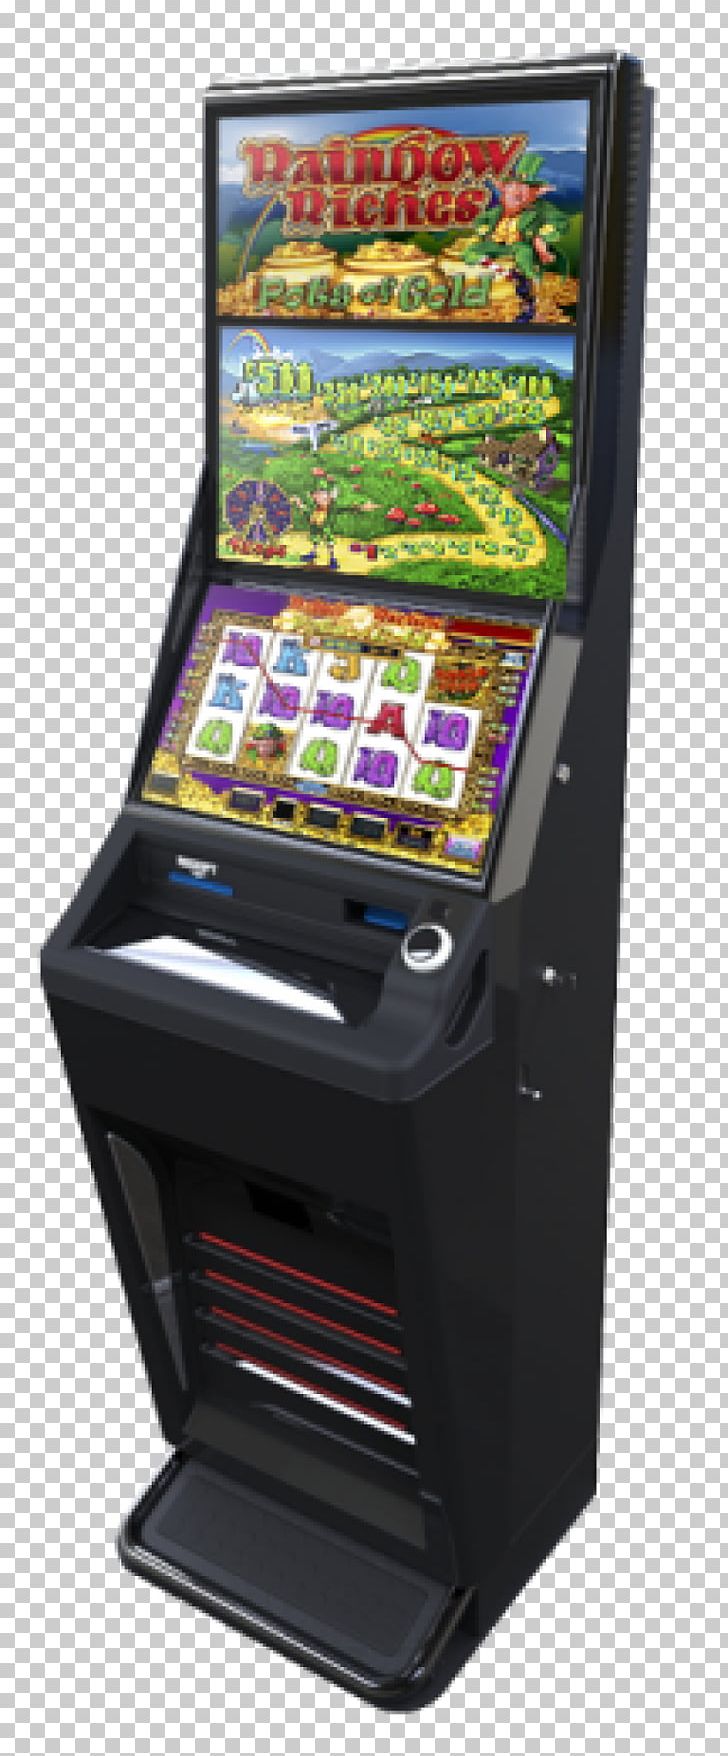 Fixed Odds Betting Terminal Roulette Gambling Sports Betting Fixed-odds Betting PNG, Clipart, Betting Shop, Electronic Device, Fixedodds Betting, Fixed Odds Betting Terminal, Gadget Free PNG Download